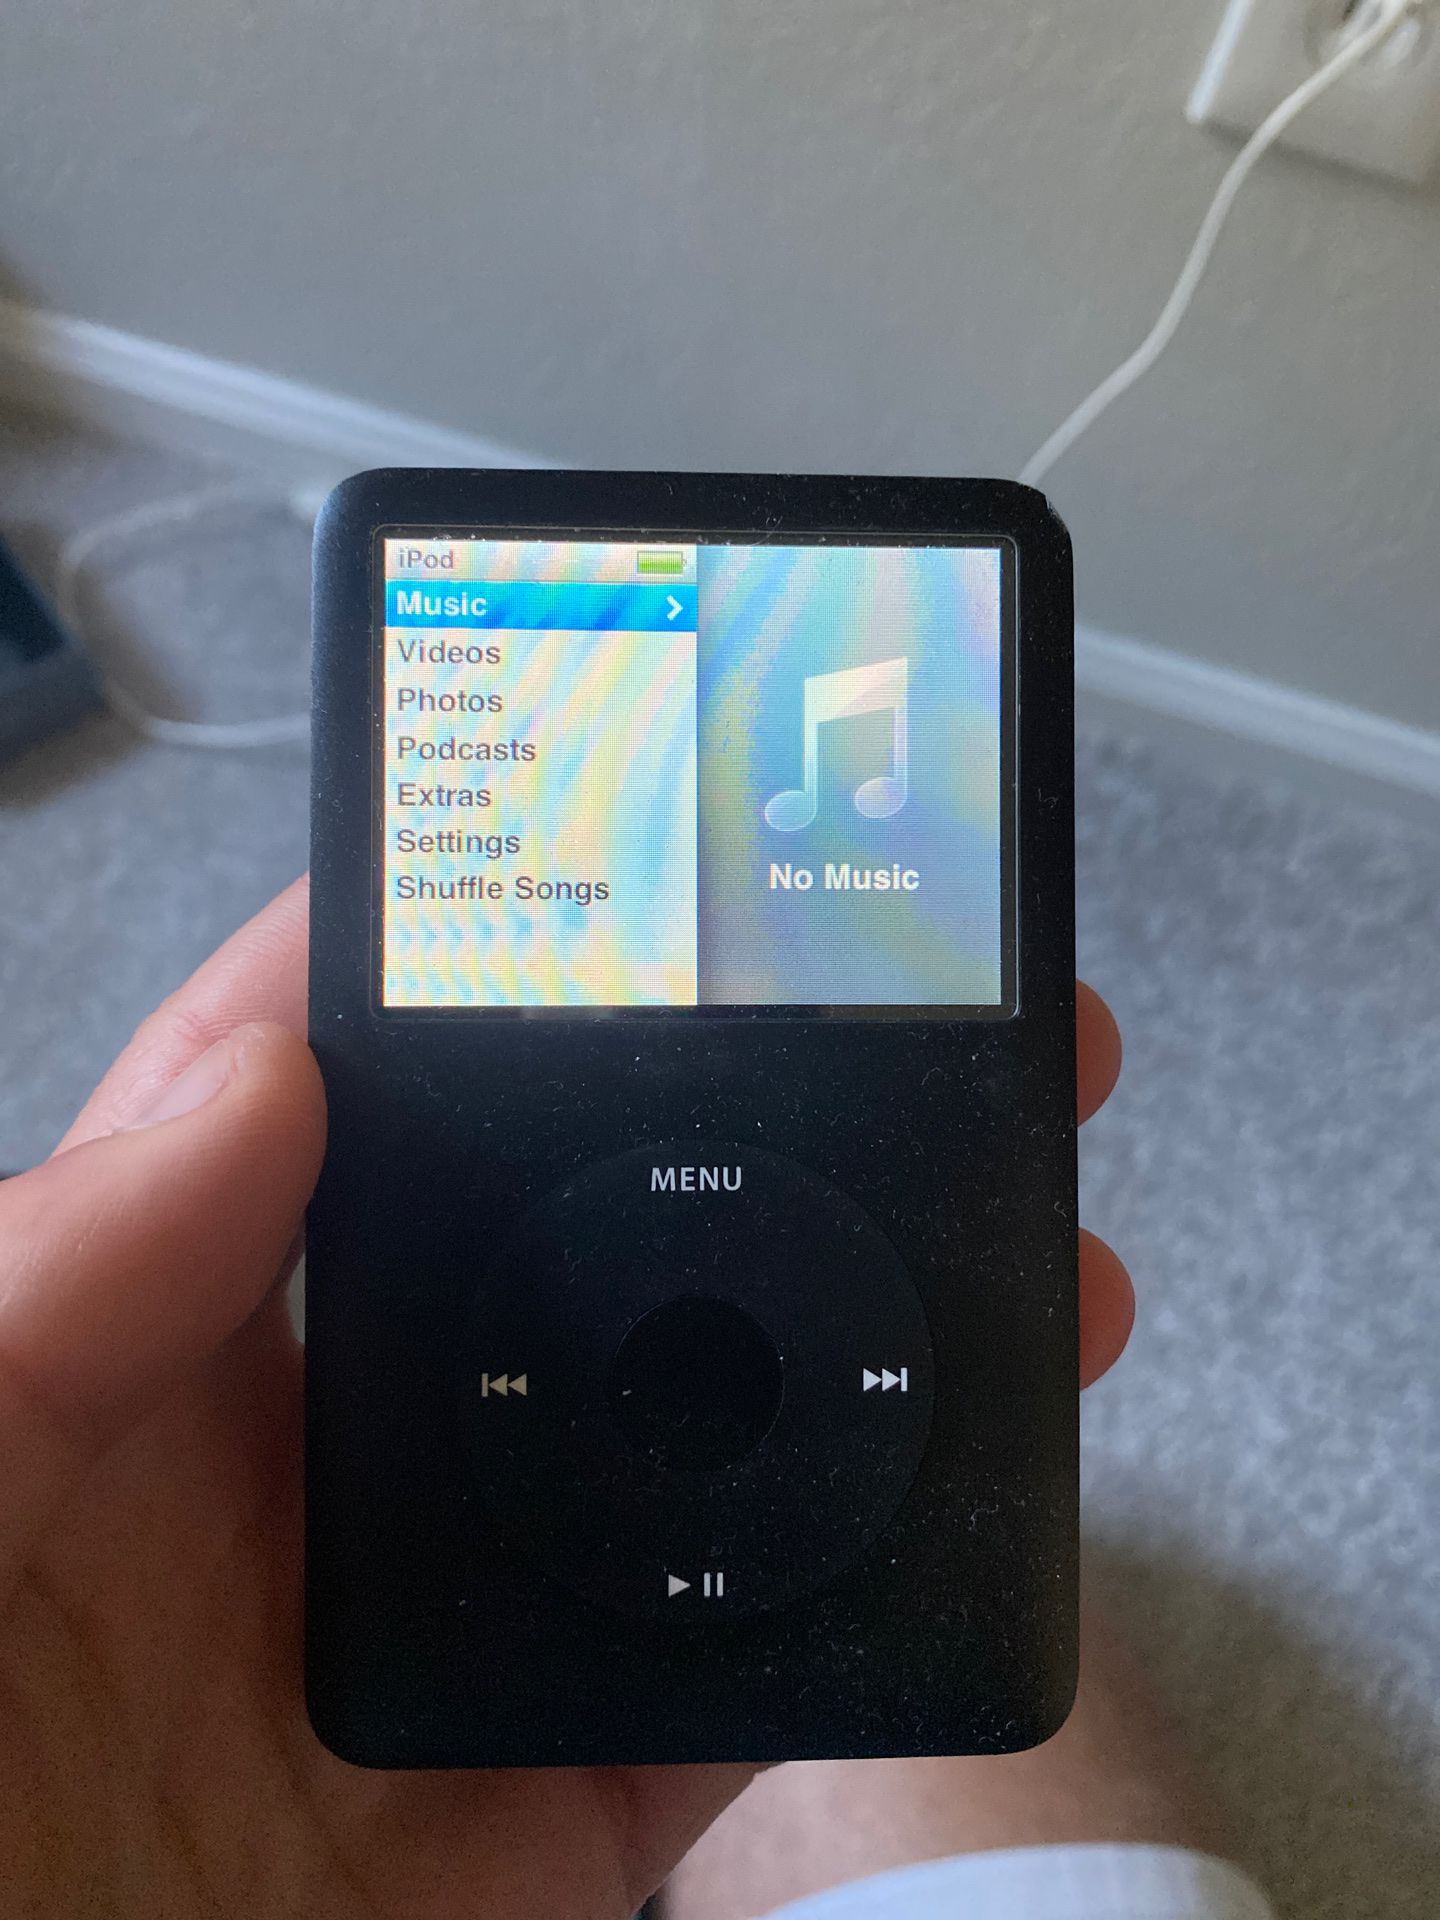 iPod Classic 80gb with charger, headphones, and case